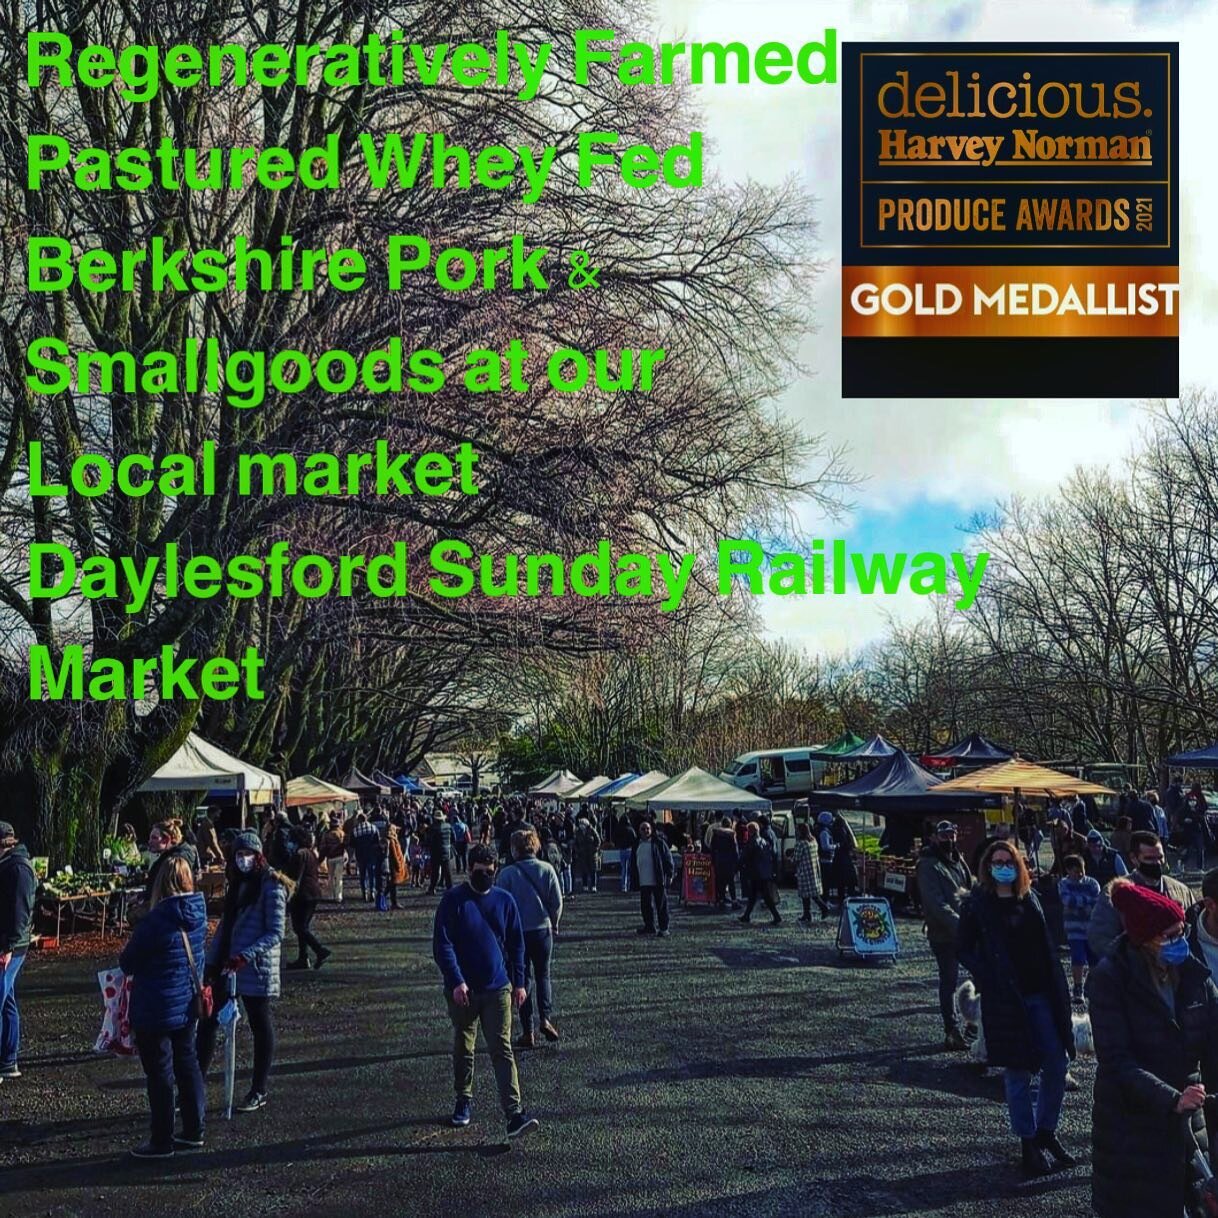 At this Sunday&rsquo;s @daylesford_sunday_market with our beyond delicious and nutritious regenerative farmed Pastured Whey Fed Pork, Nitrate Free Bacon &amp; Handmade Gluten/Preservative Free Sausage all born &amp; raised at Brooklands just 10 minut